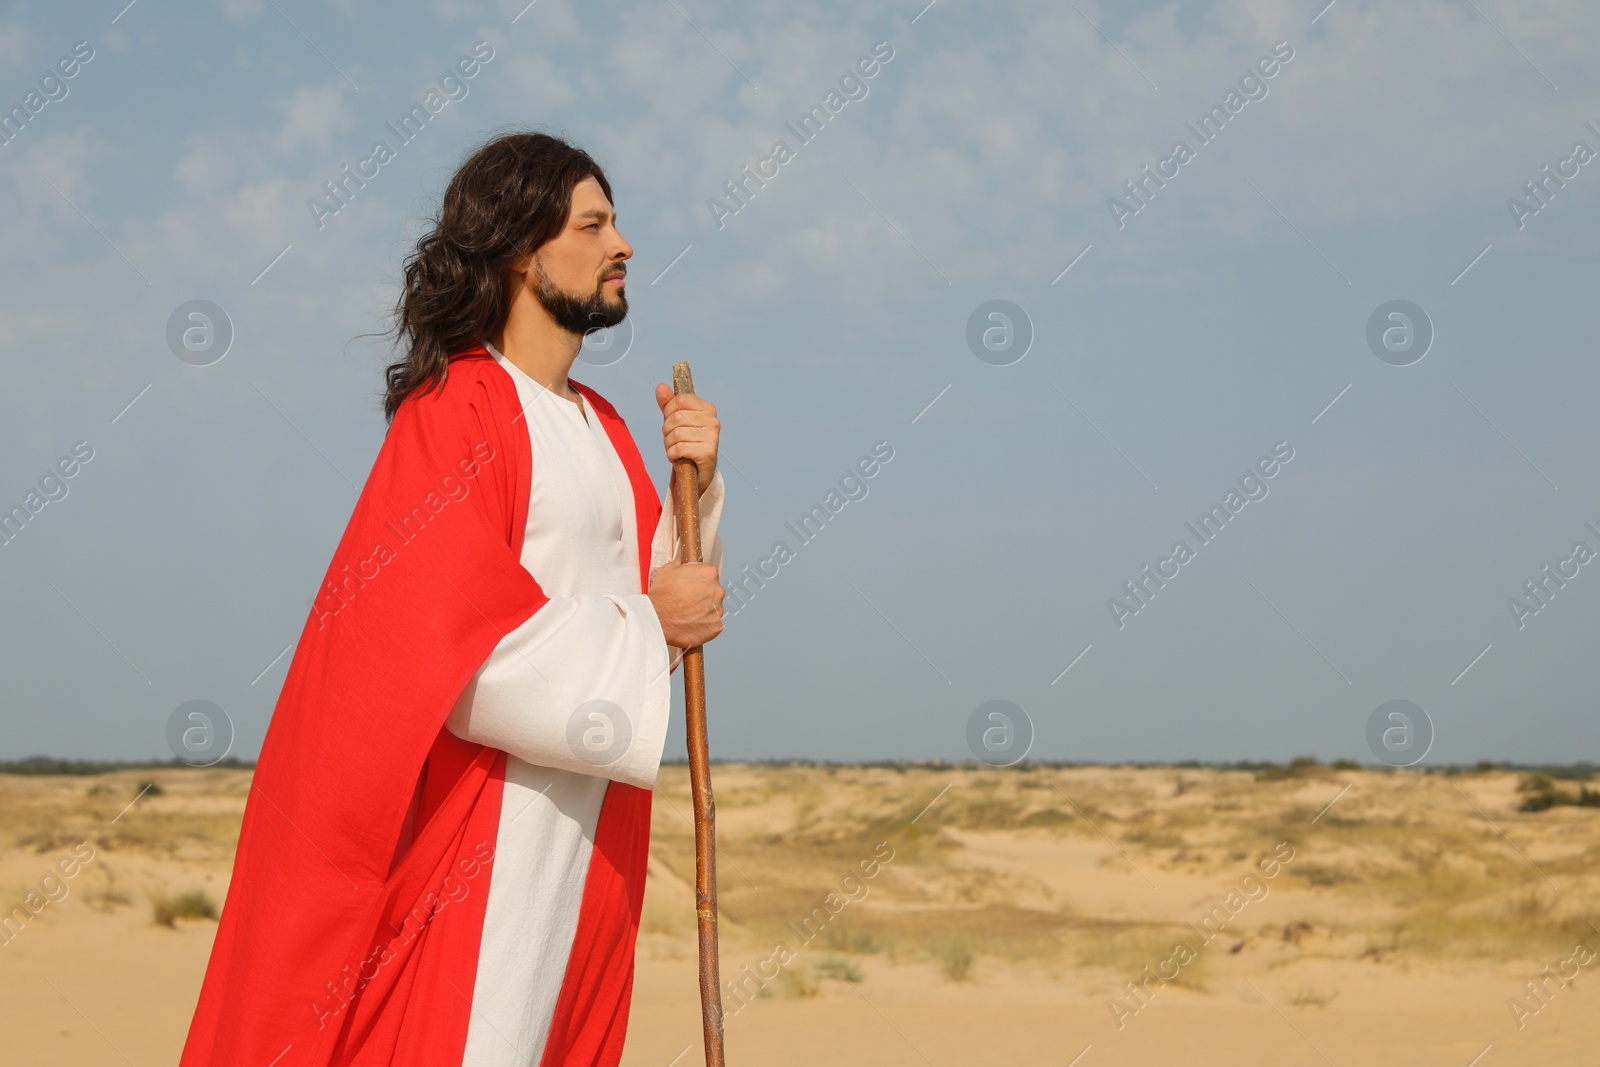 Photo of Jesus Christ walking with stick in desert. Space for text